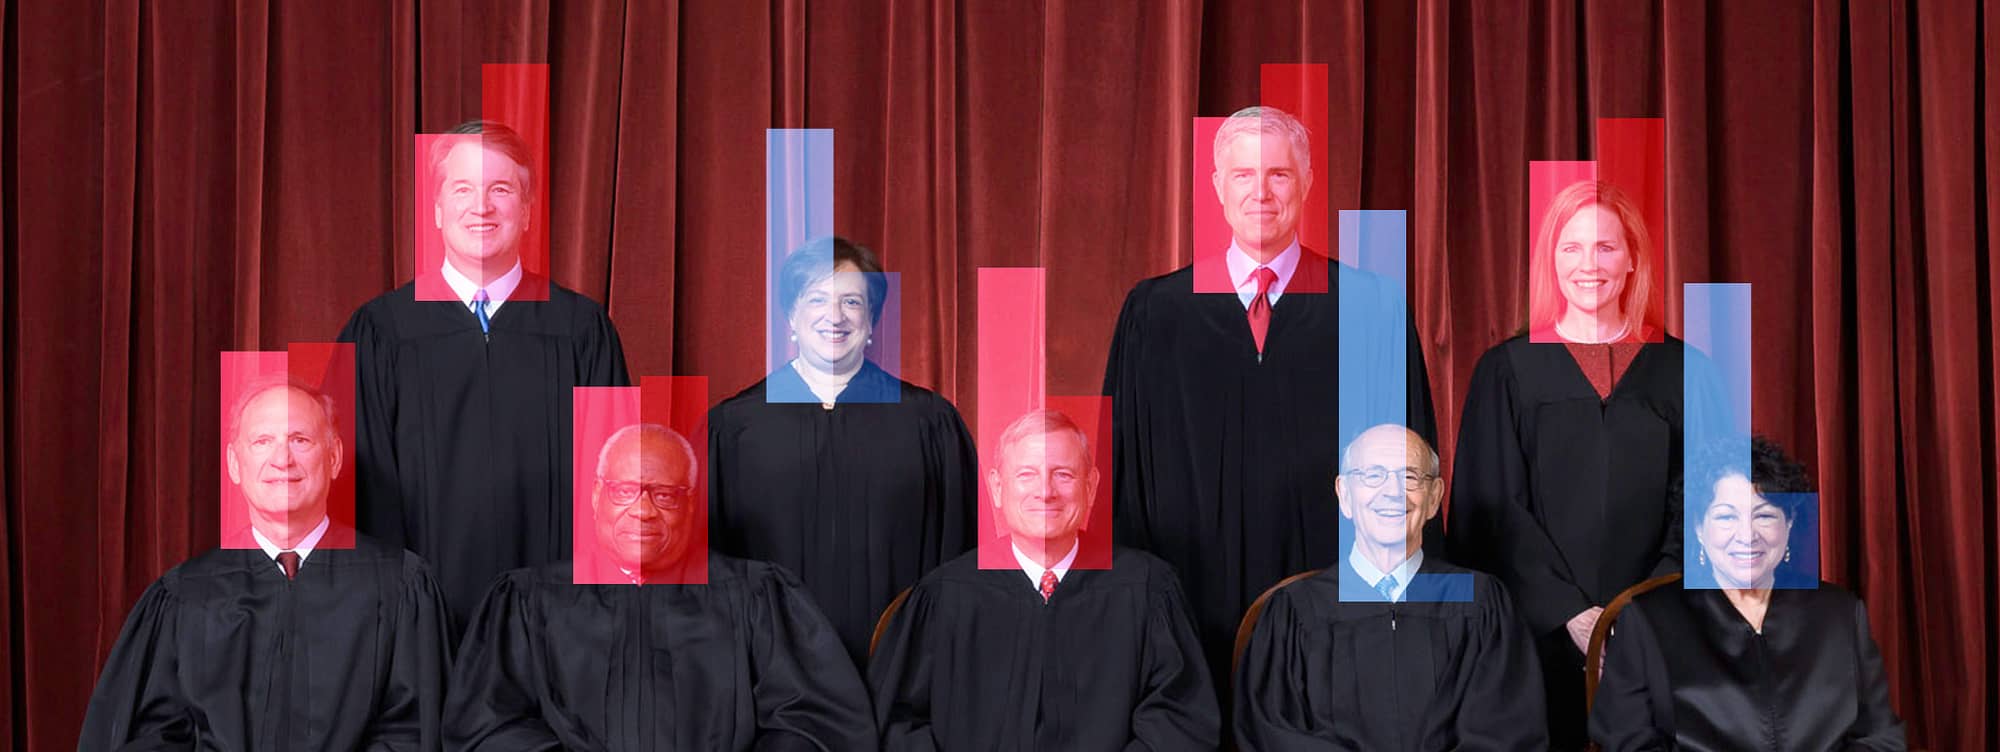 All nine justices of the Supreme Court, seated or standing, with charts overlaying their faces